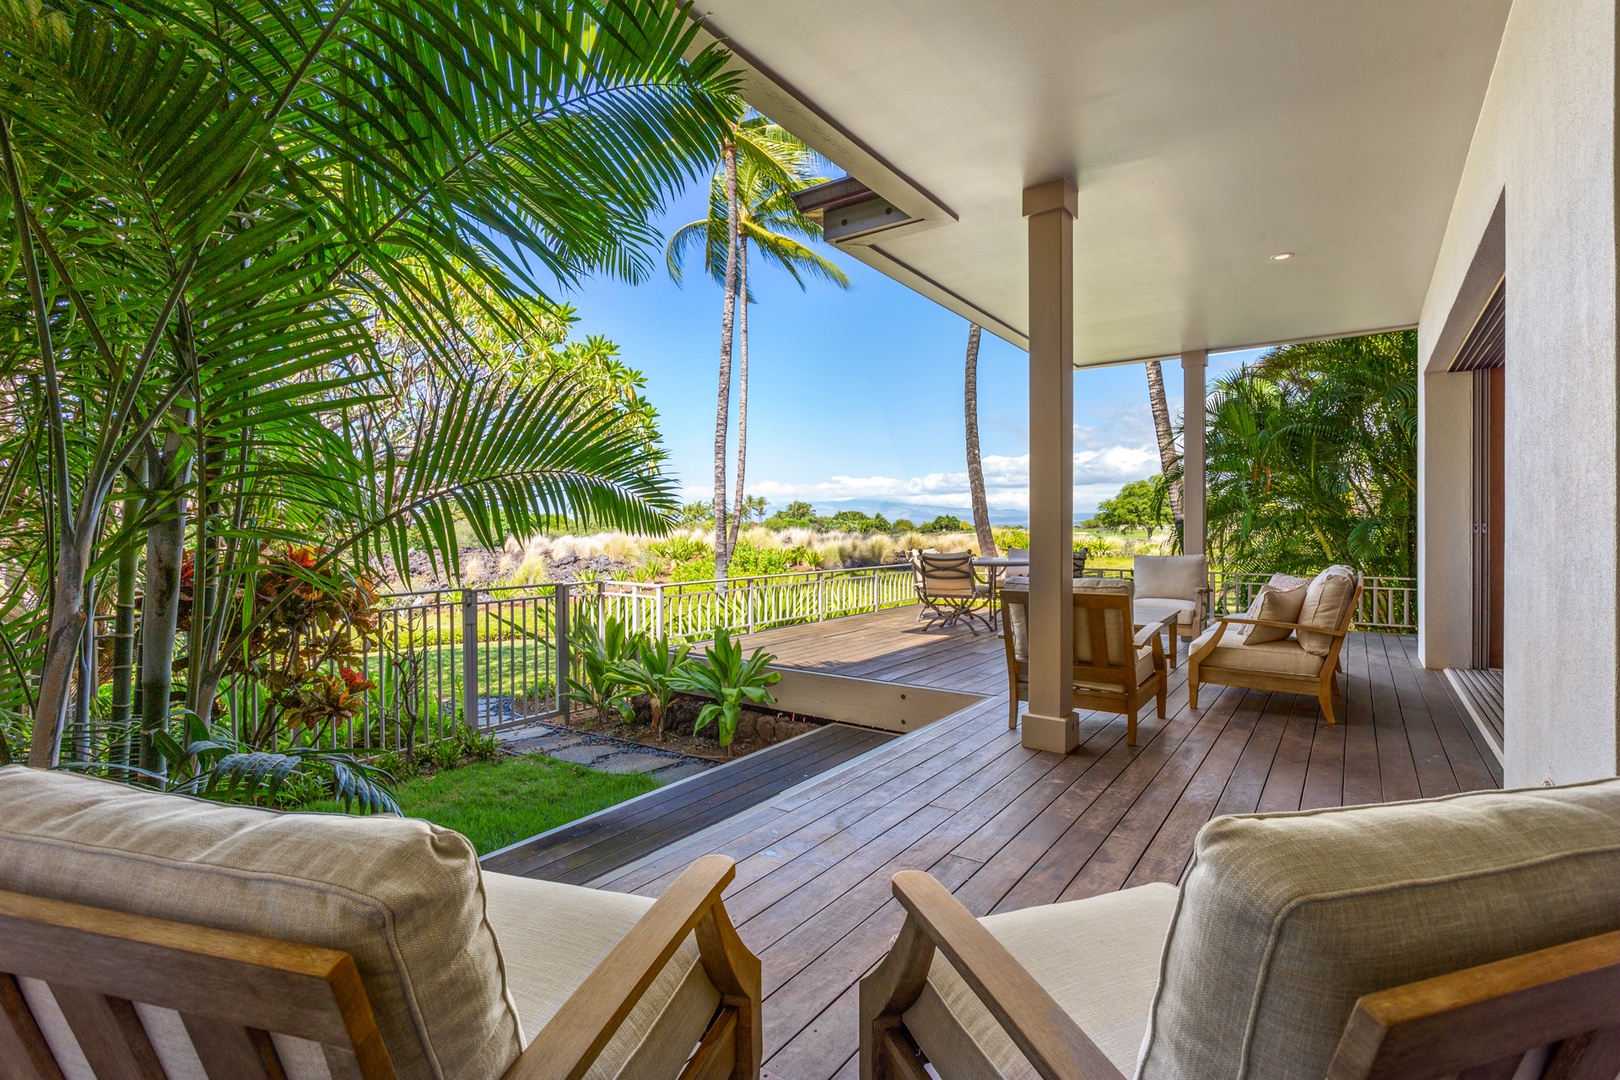 Kailua Kona Vacation Rentals, OFB 3BD Ka'Ulu Villa (129D) at Four Seasons Resort at Hualalai - Yet another view of lower deck from primary lounge seating with steps to your own private yard.